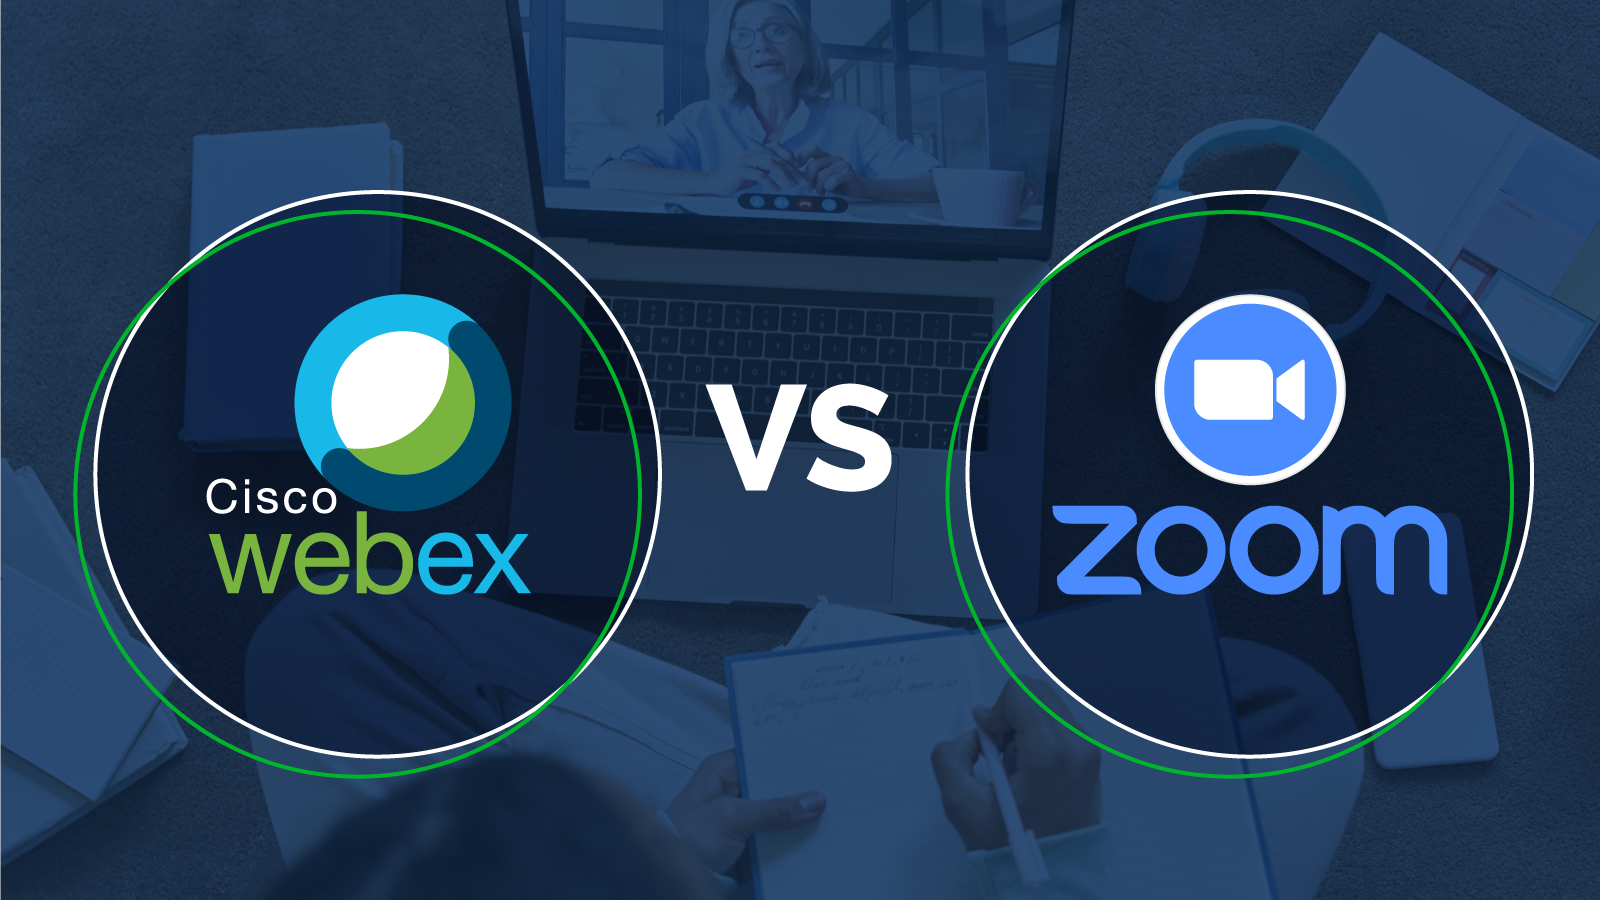 Webex vs Zoom: Which Collaboration Solution is Better for Education Environments?